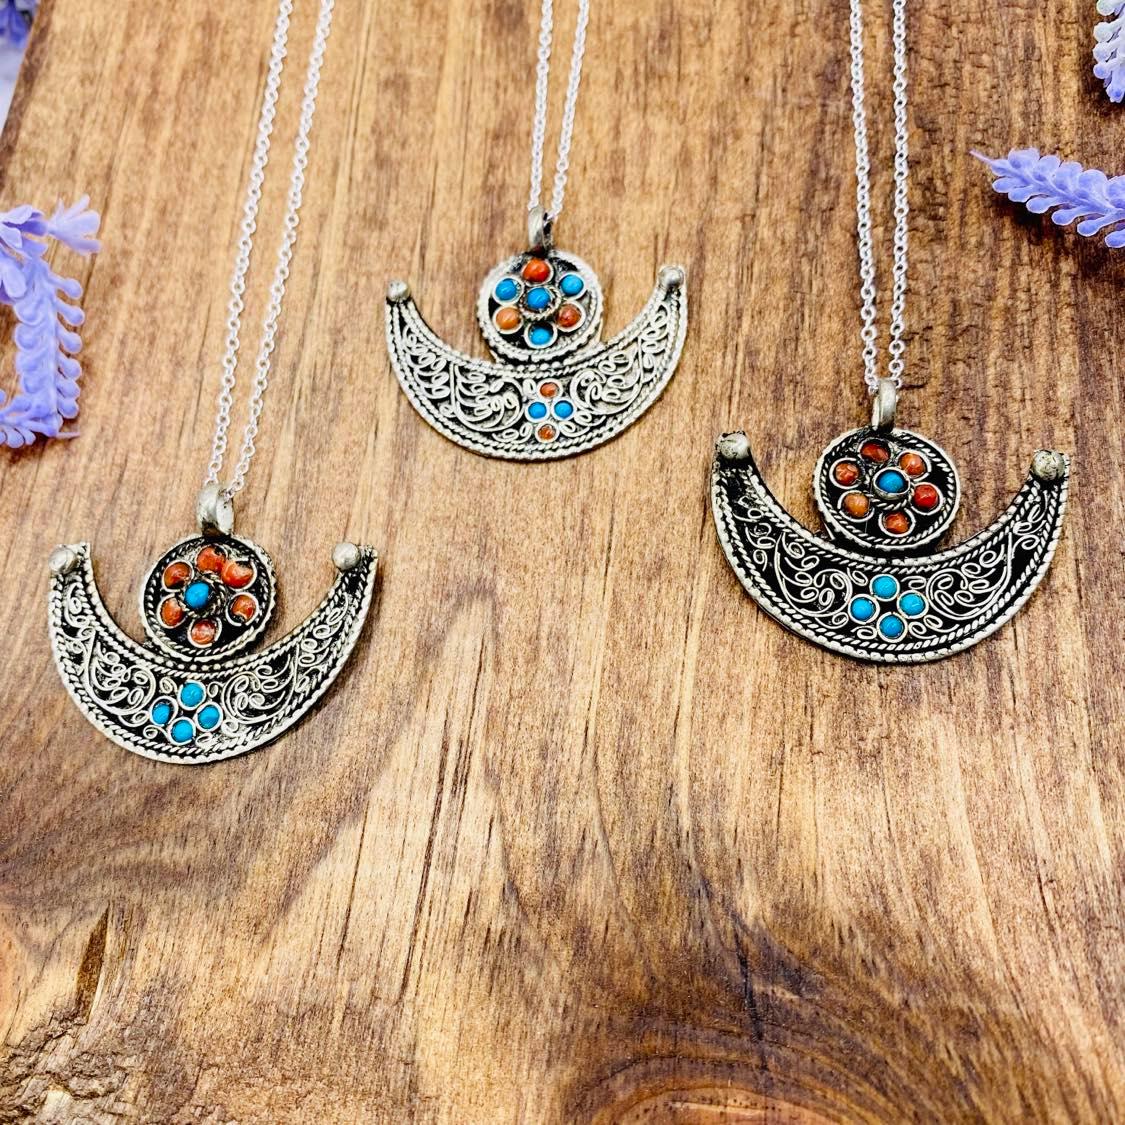 Crescent Moon Pendant, Filigree Design Necklace, Moon Shape Jewelry, Bohemian Style Pendant, Handmade Statement Jewelry, Gift For Her